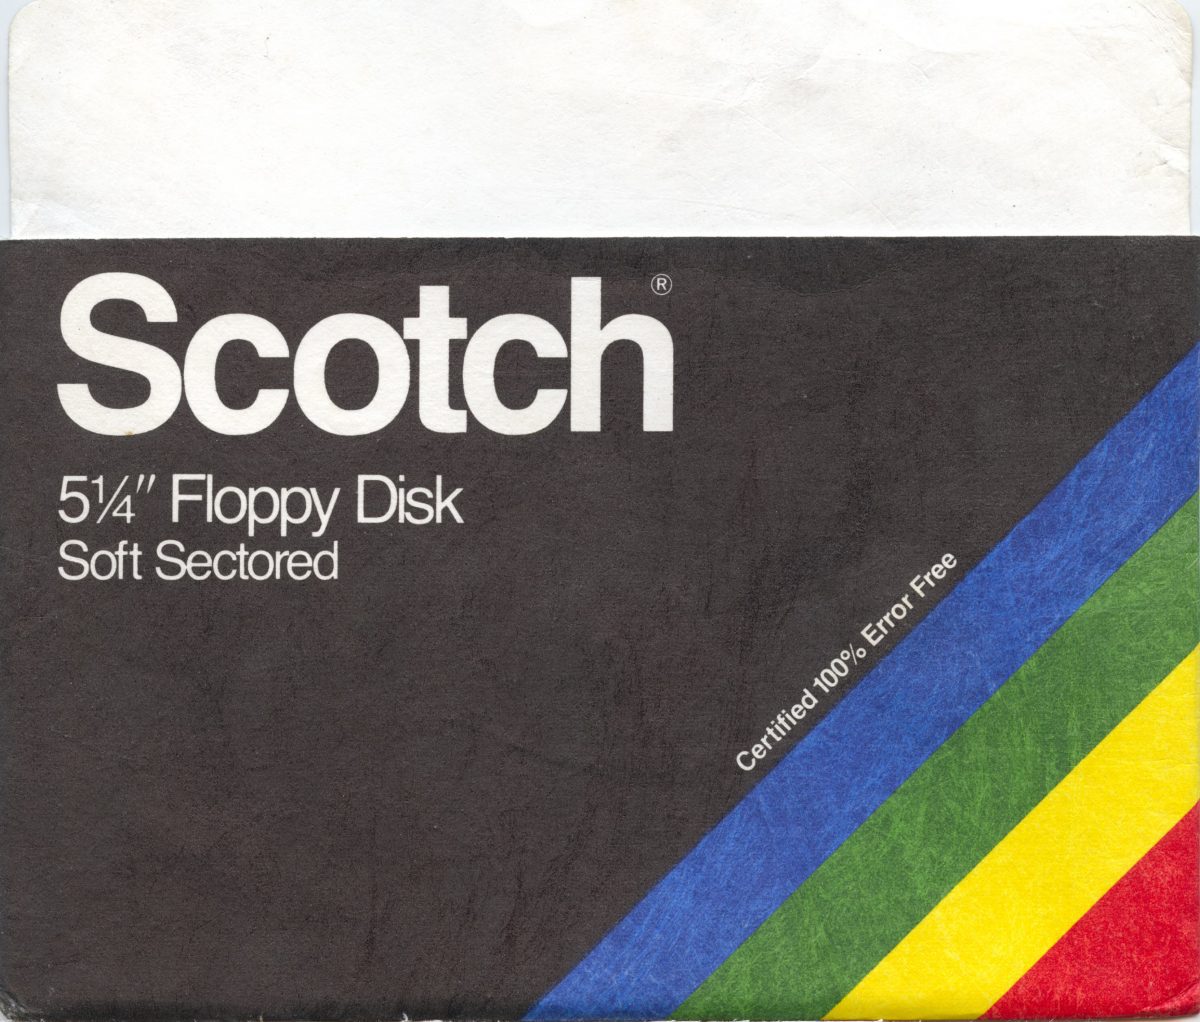 Scotch Disk Floppy DIsk Cover Sleeves